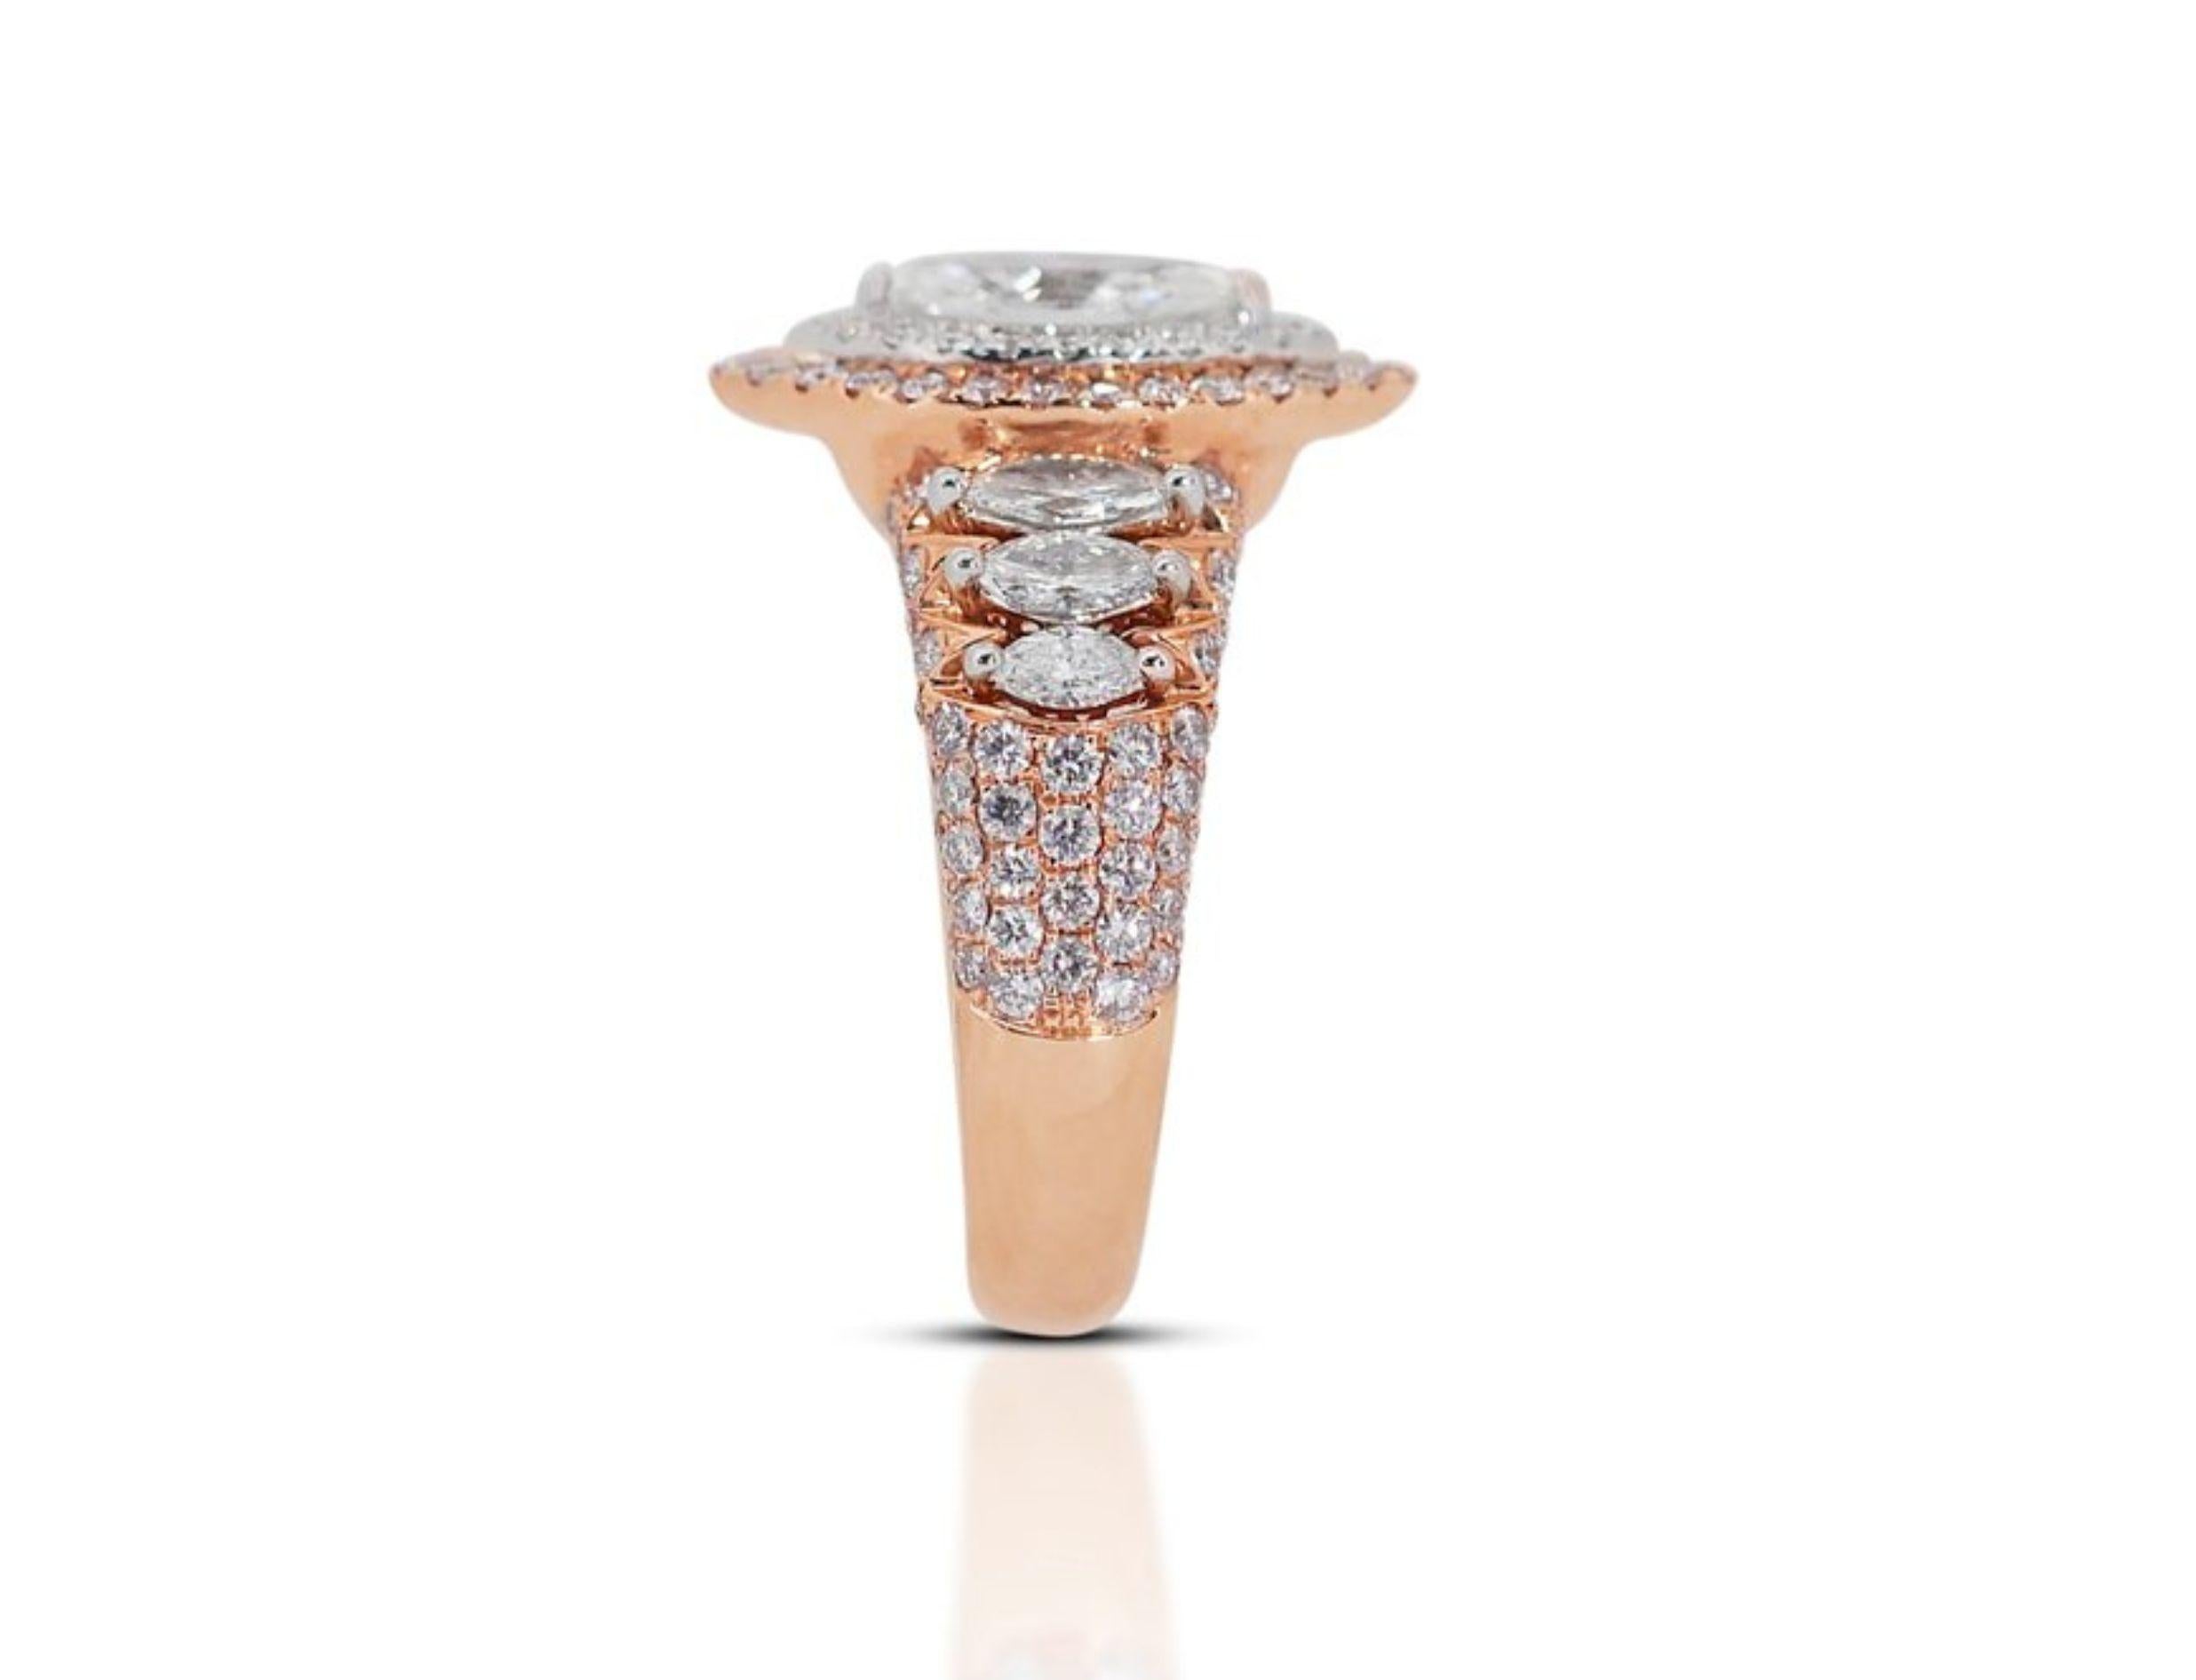 Women's Breathtaking 0.70ct Marquise Diamond Ring in 18K Rose Gold